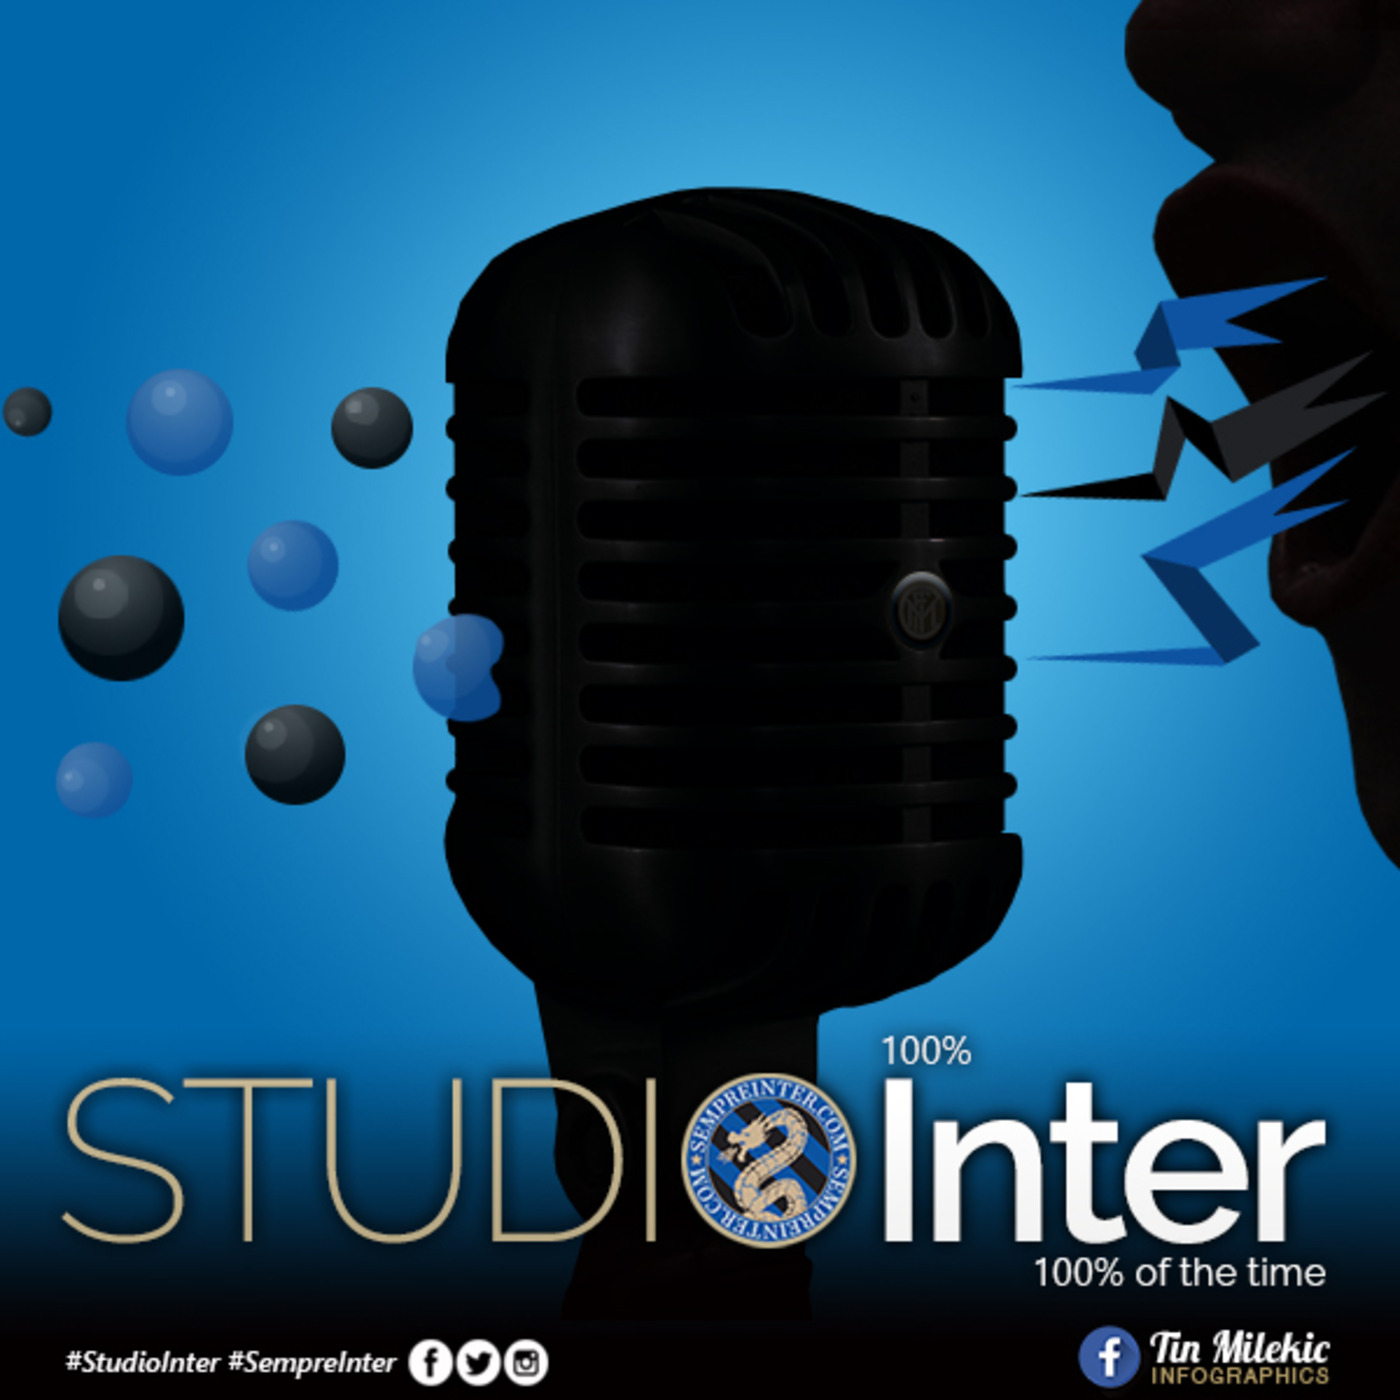 Episode 179: #StudioInter Ep. 179: ”Inter 9 Wins Away At Most From Clinching The Scudetto”